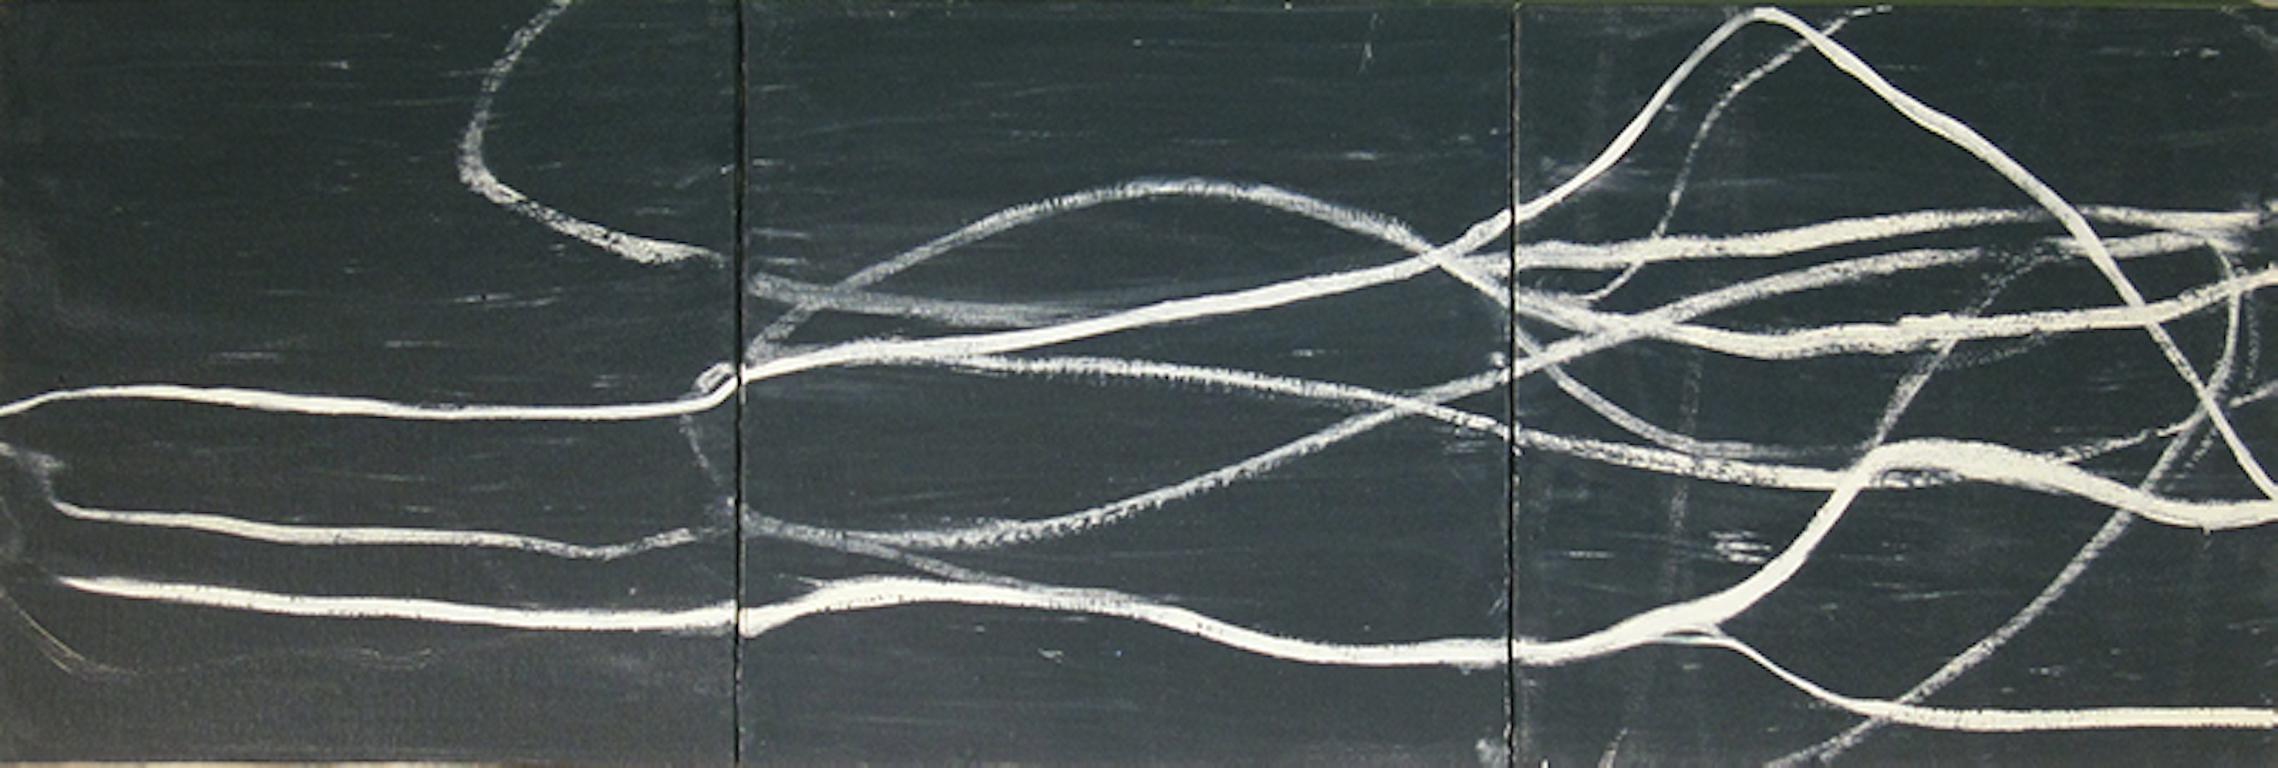 In her oil on canvas abstract painting, "Confluence," Jane Schiowitz experiments with the capacity of her medium to create a chalkboard-like surface. Schiowitz is an abstract painter based in Nyack, New York. Her works suggest an ease and curiosity